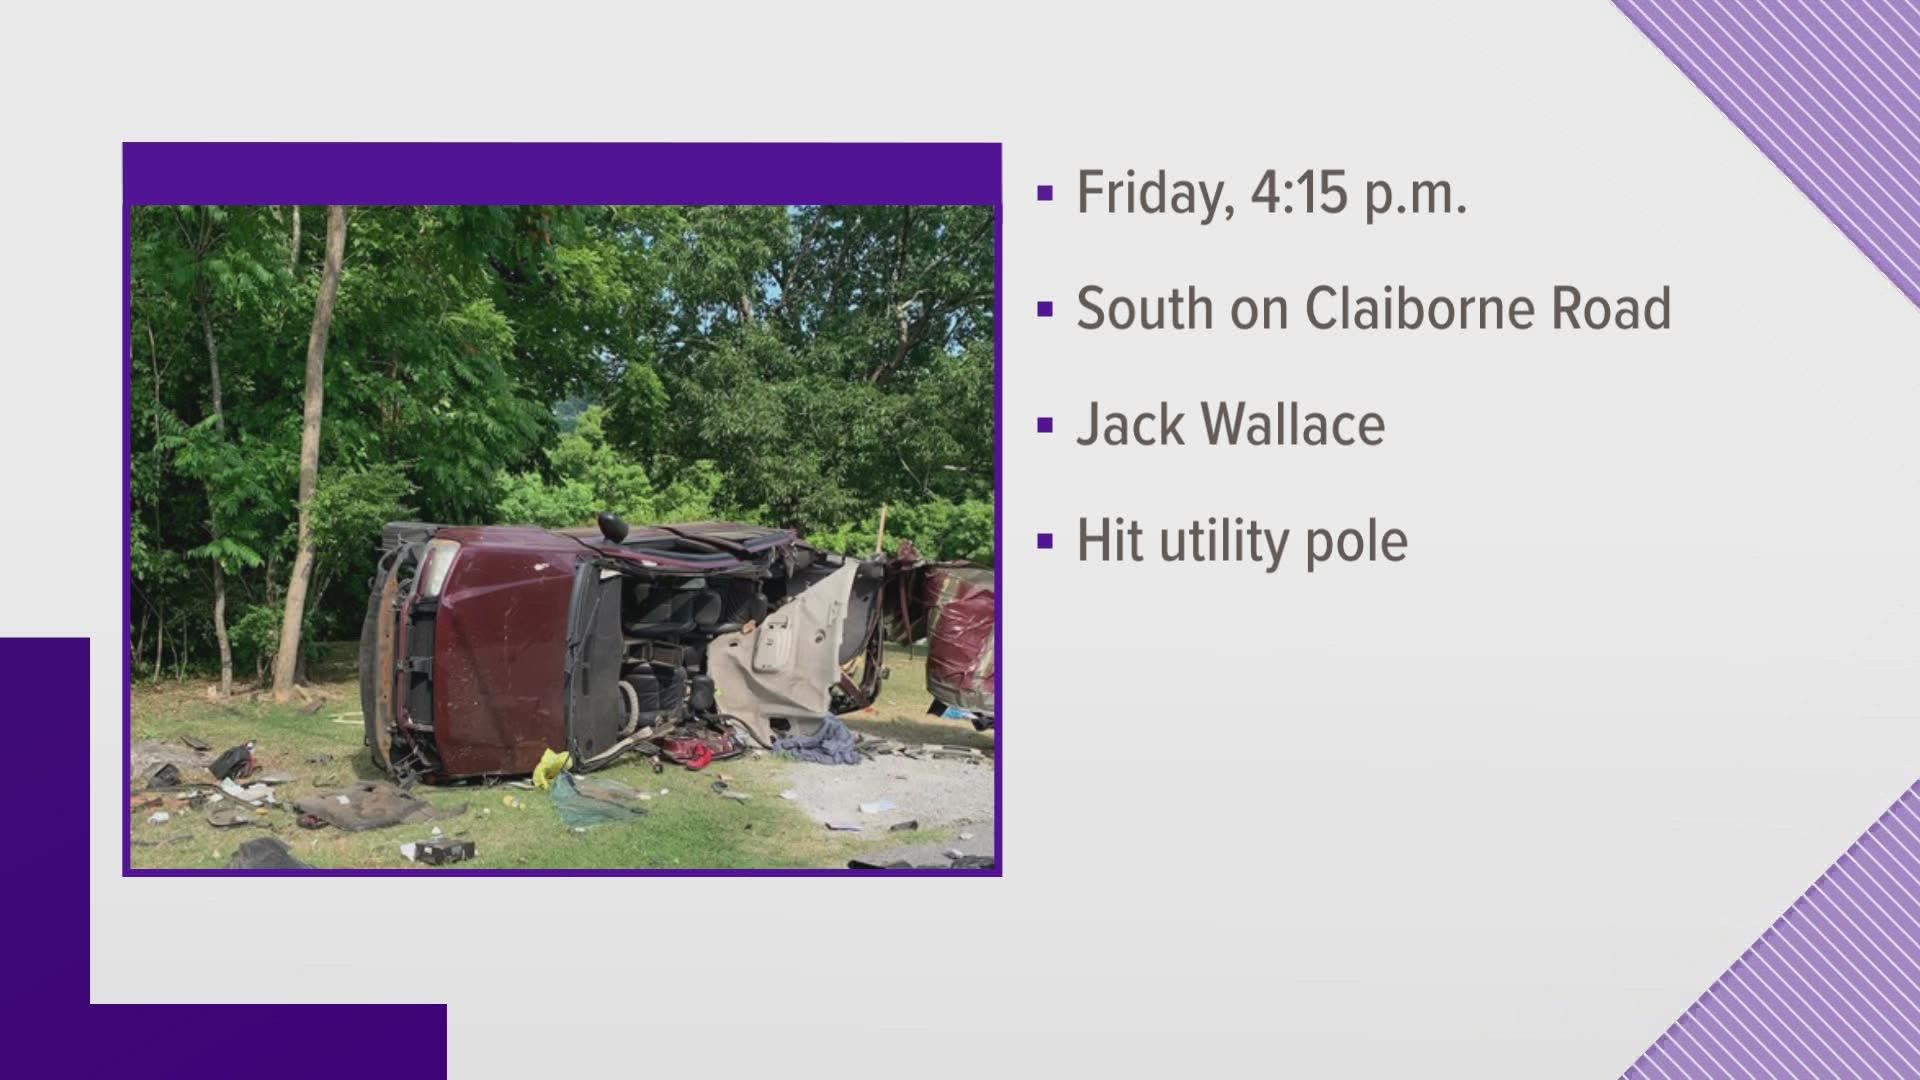 LaFollette Police Department said the driver was traveling on Claiborne Road when he lost control and hit a utility pole.